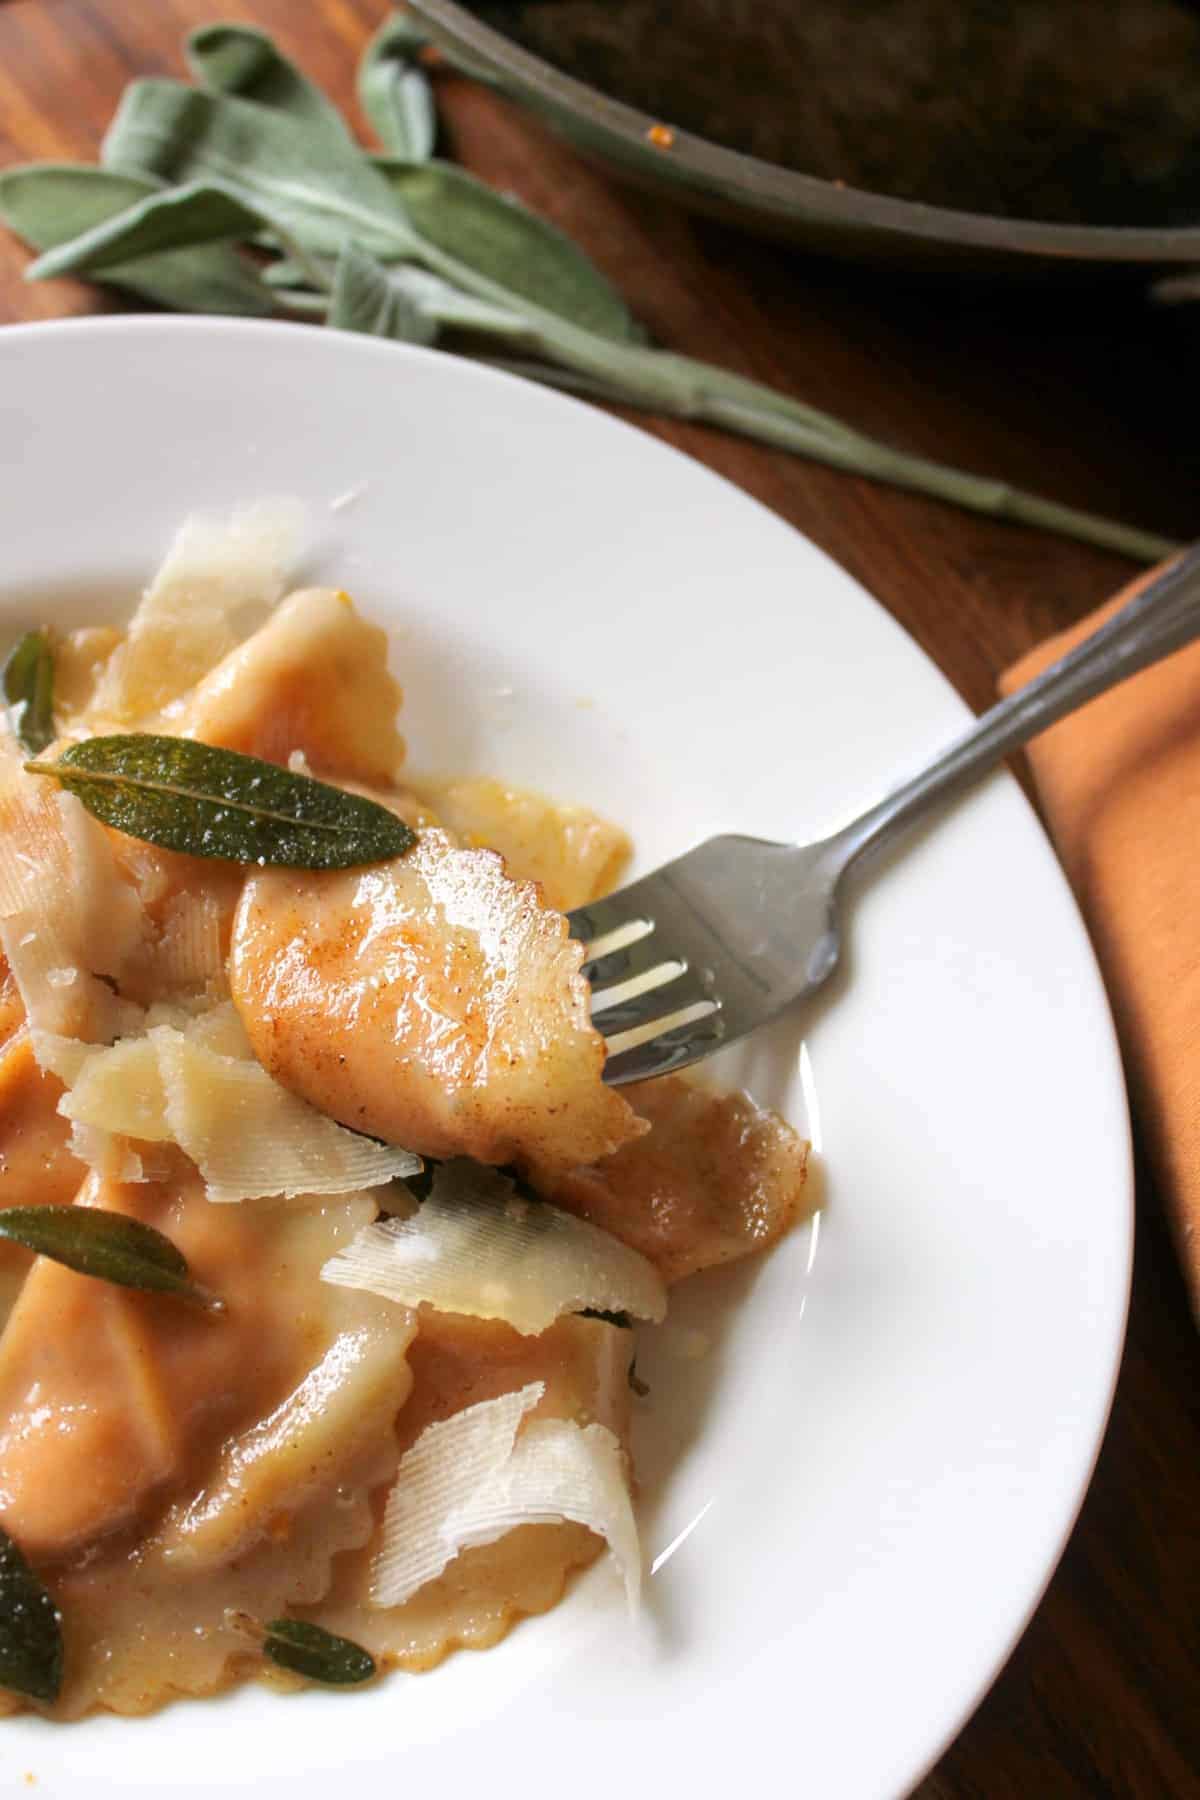 Roasted Carrot Agnolotti in a brown butter sauce is a decadent dinner that's hearty and filling